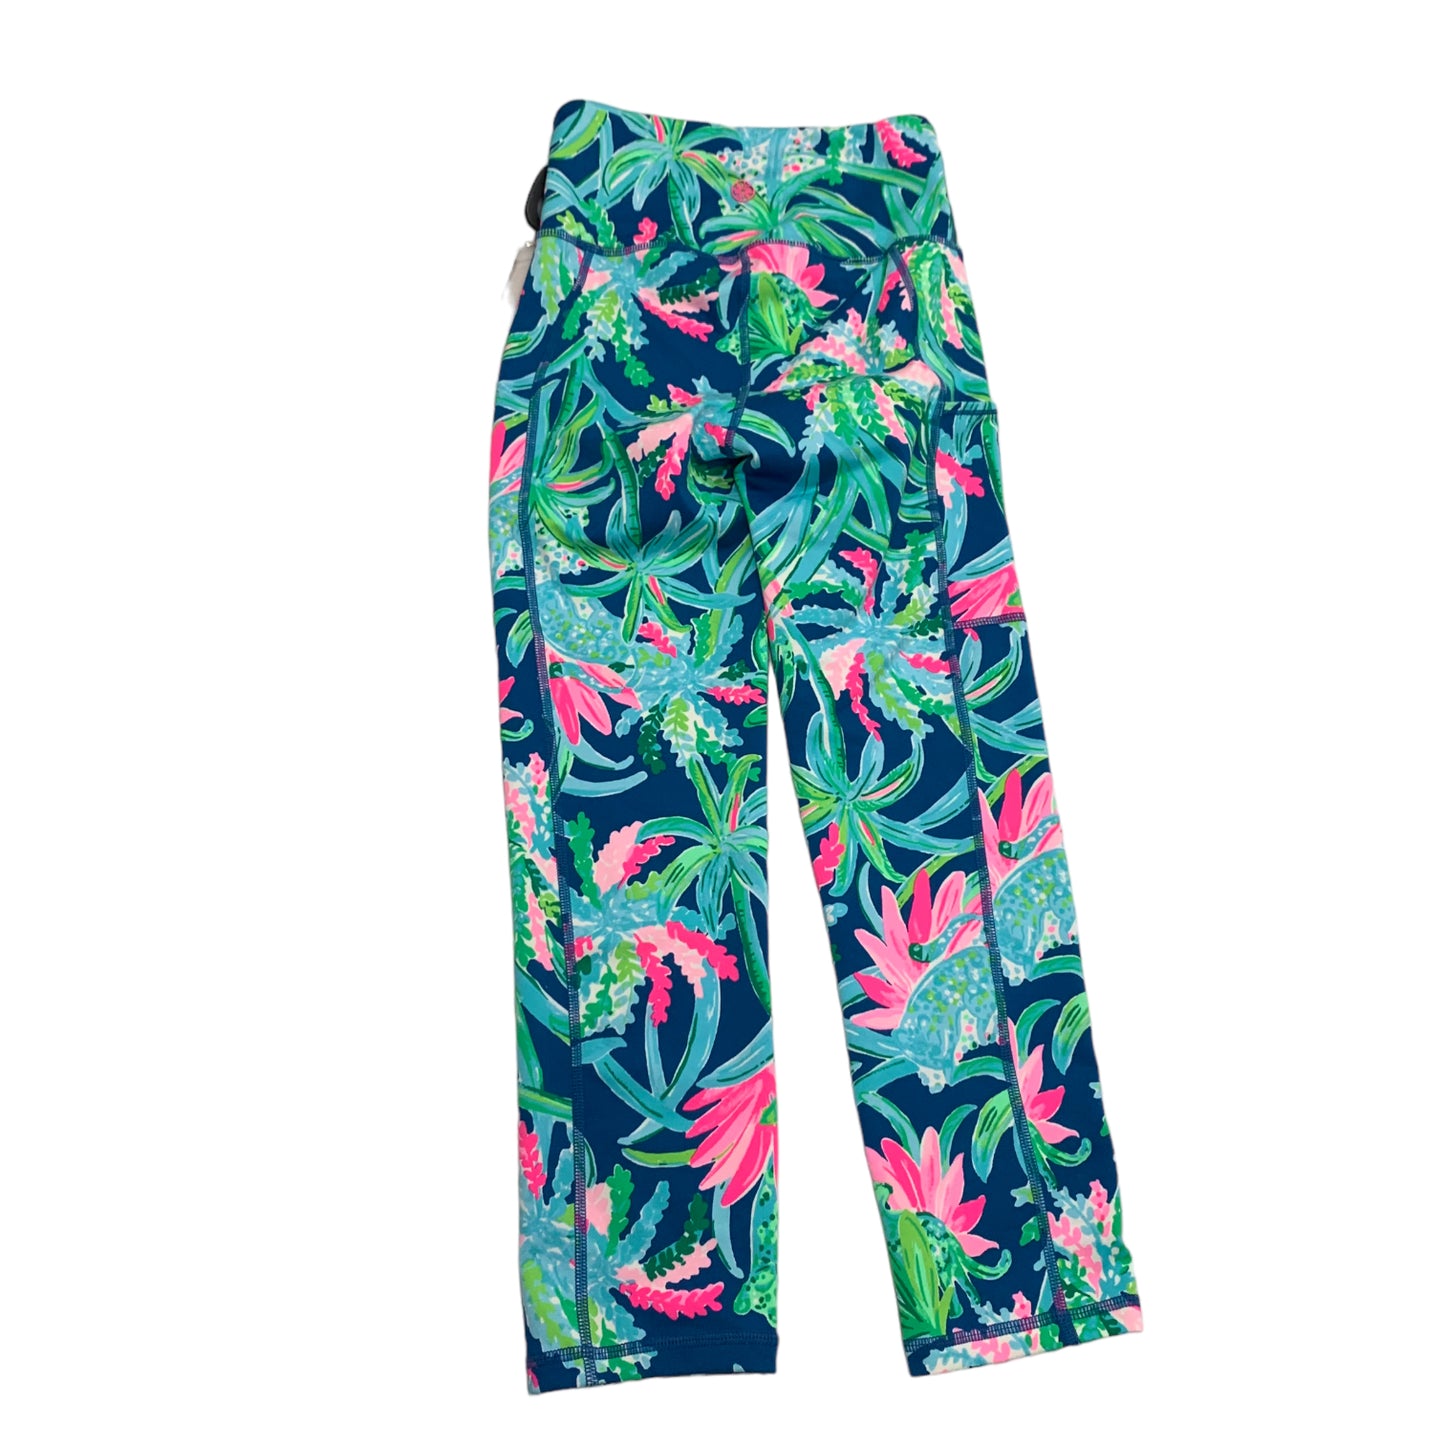 Athletic Leggings Capris By Lilly Pulitzer  Size: Xxs